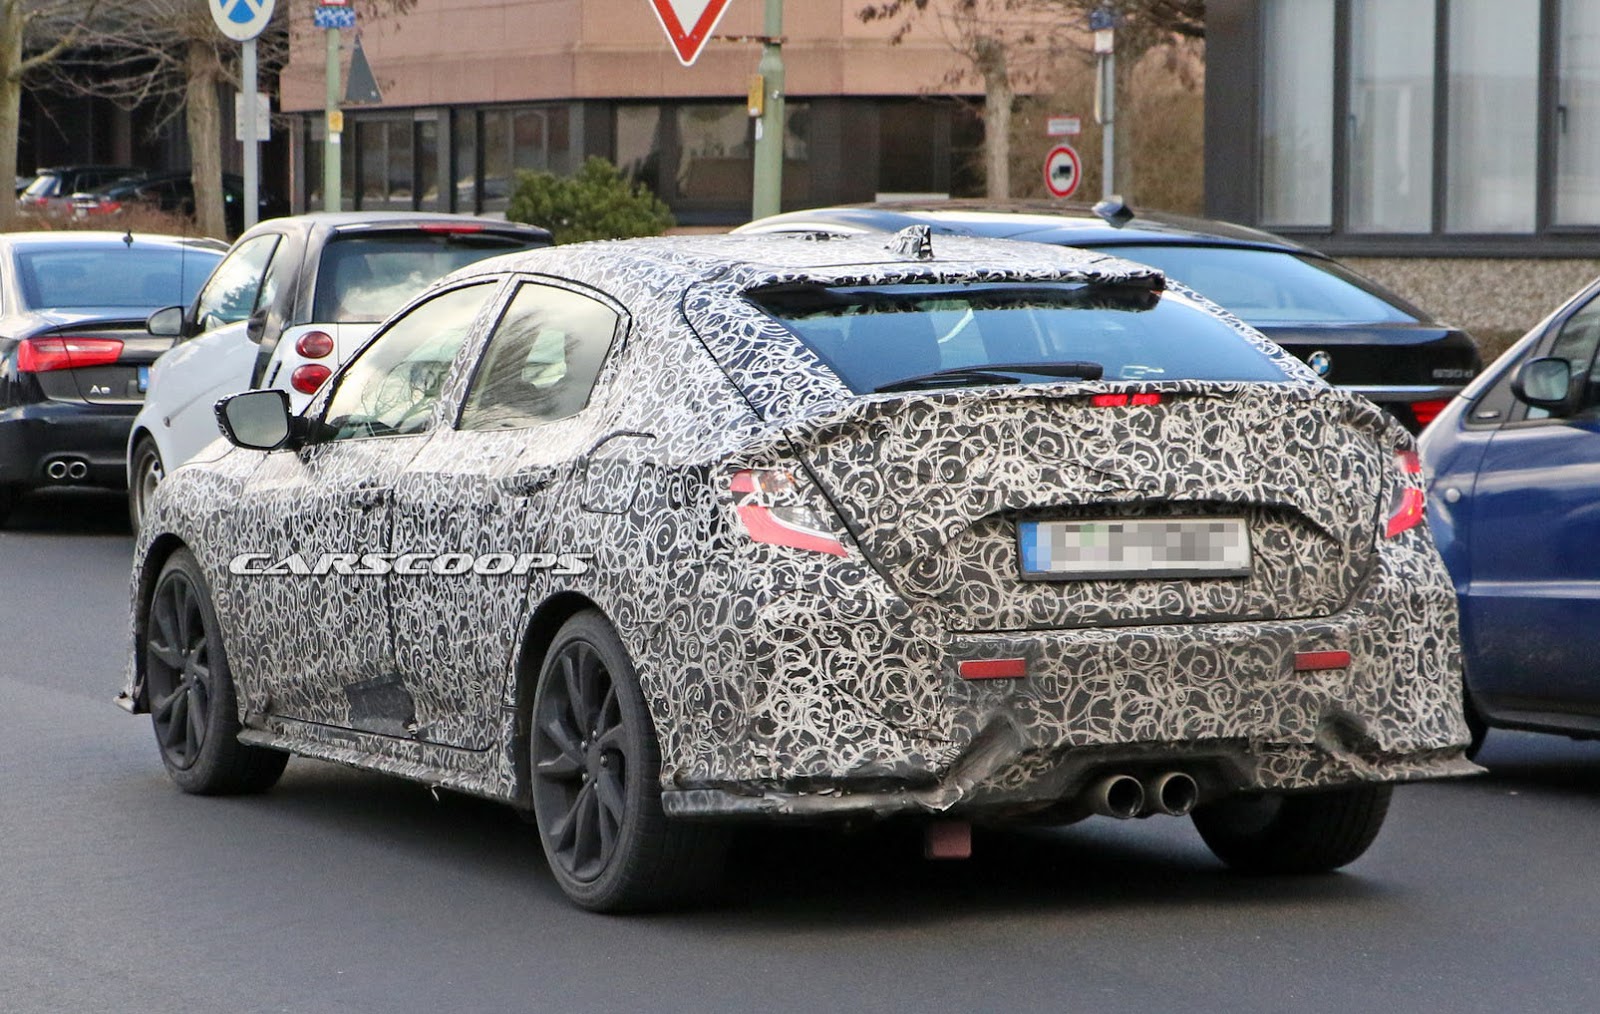 Hondas 2017 Civic Hatch Caught Undercover Could Be The Si Or Type